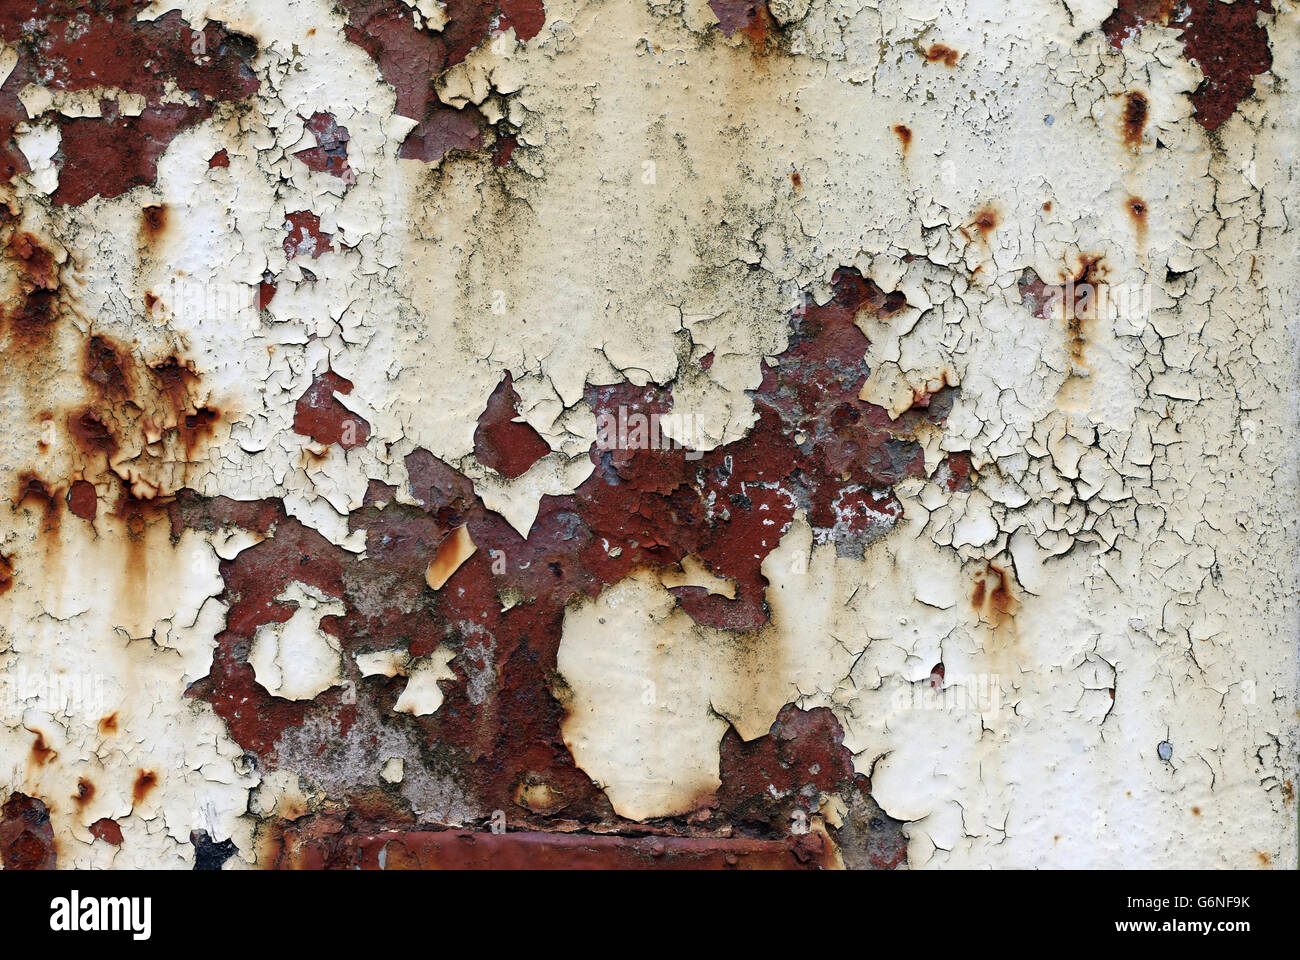 Cracked and peeled paint on the iron surface Stock Photo